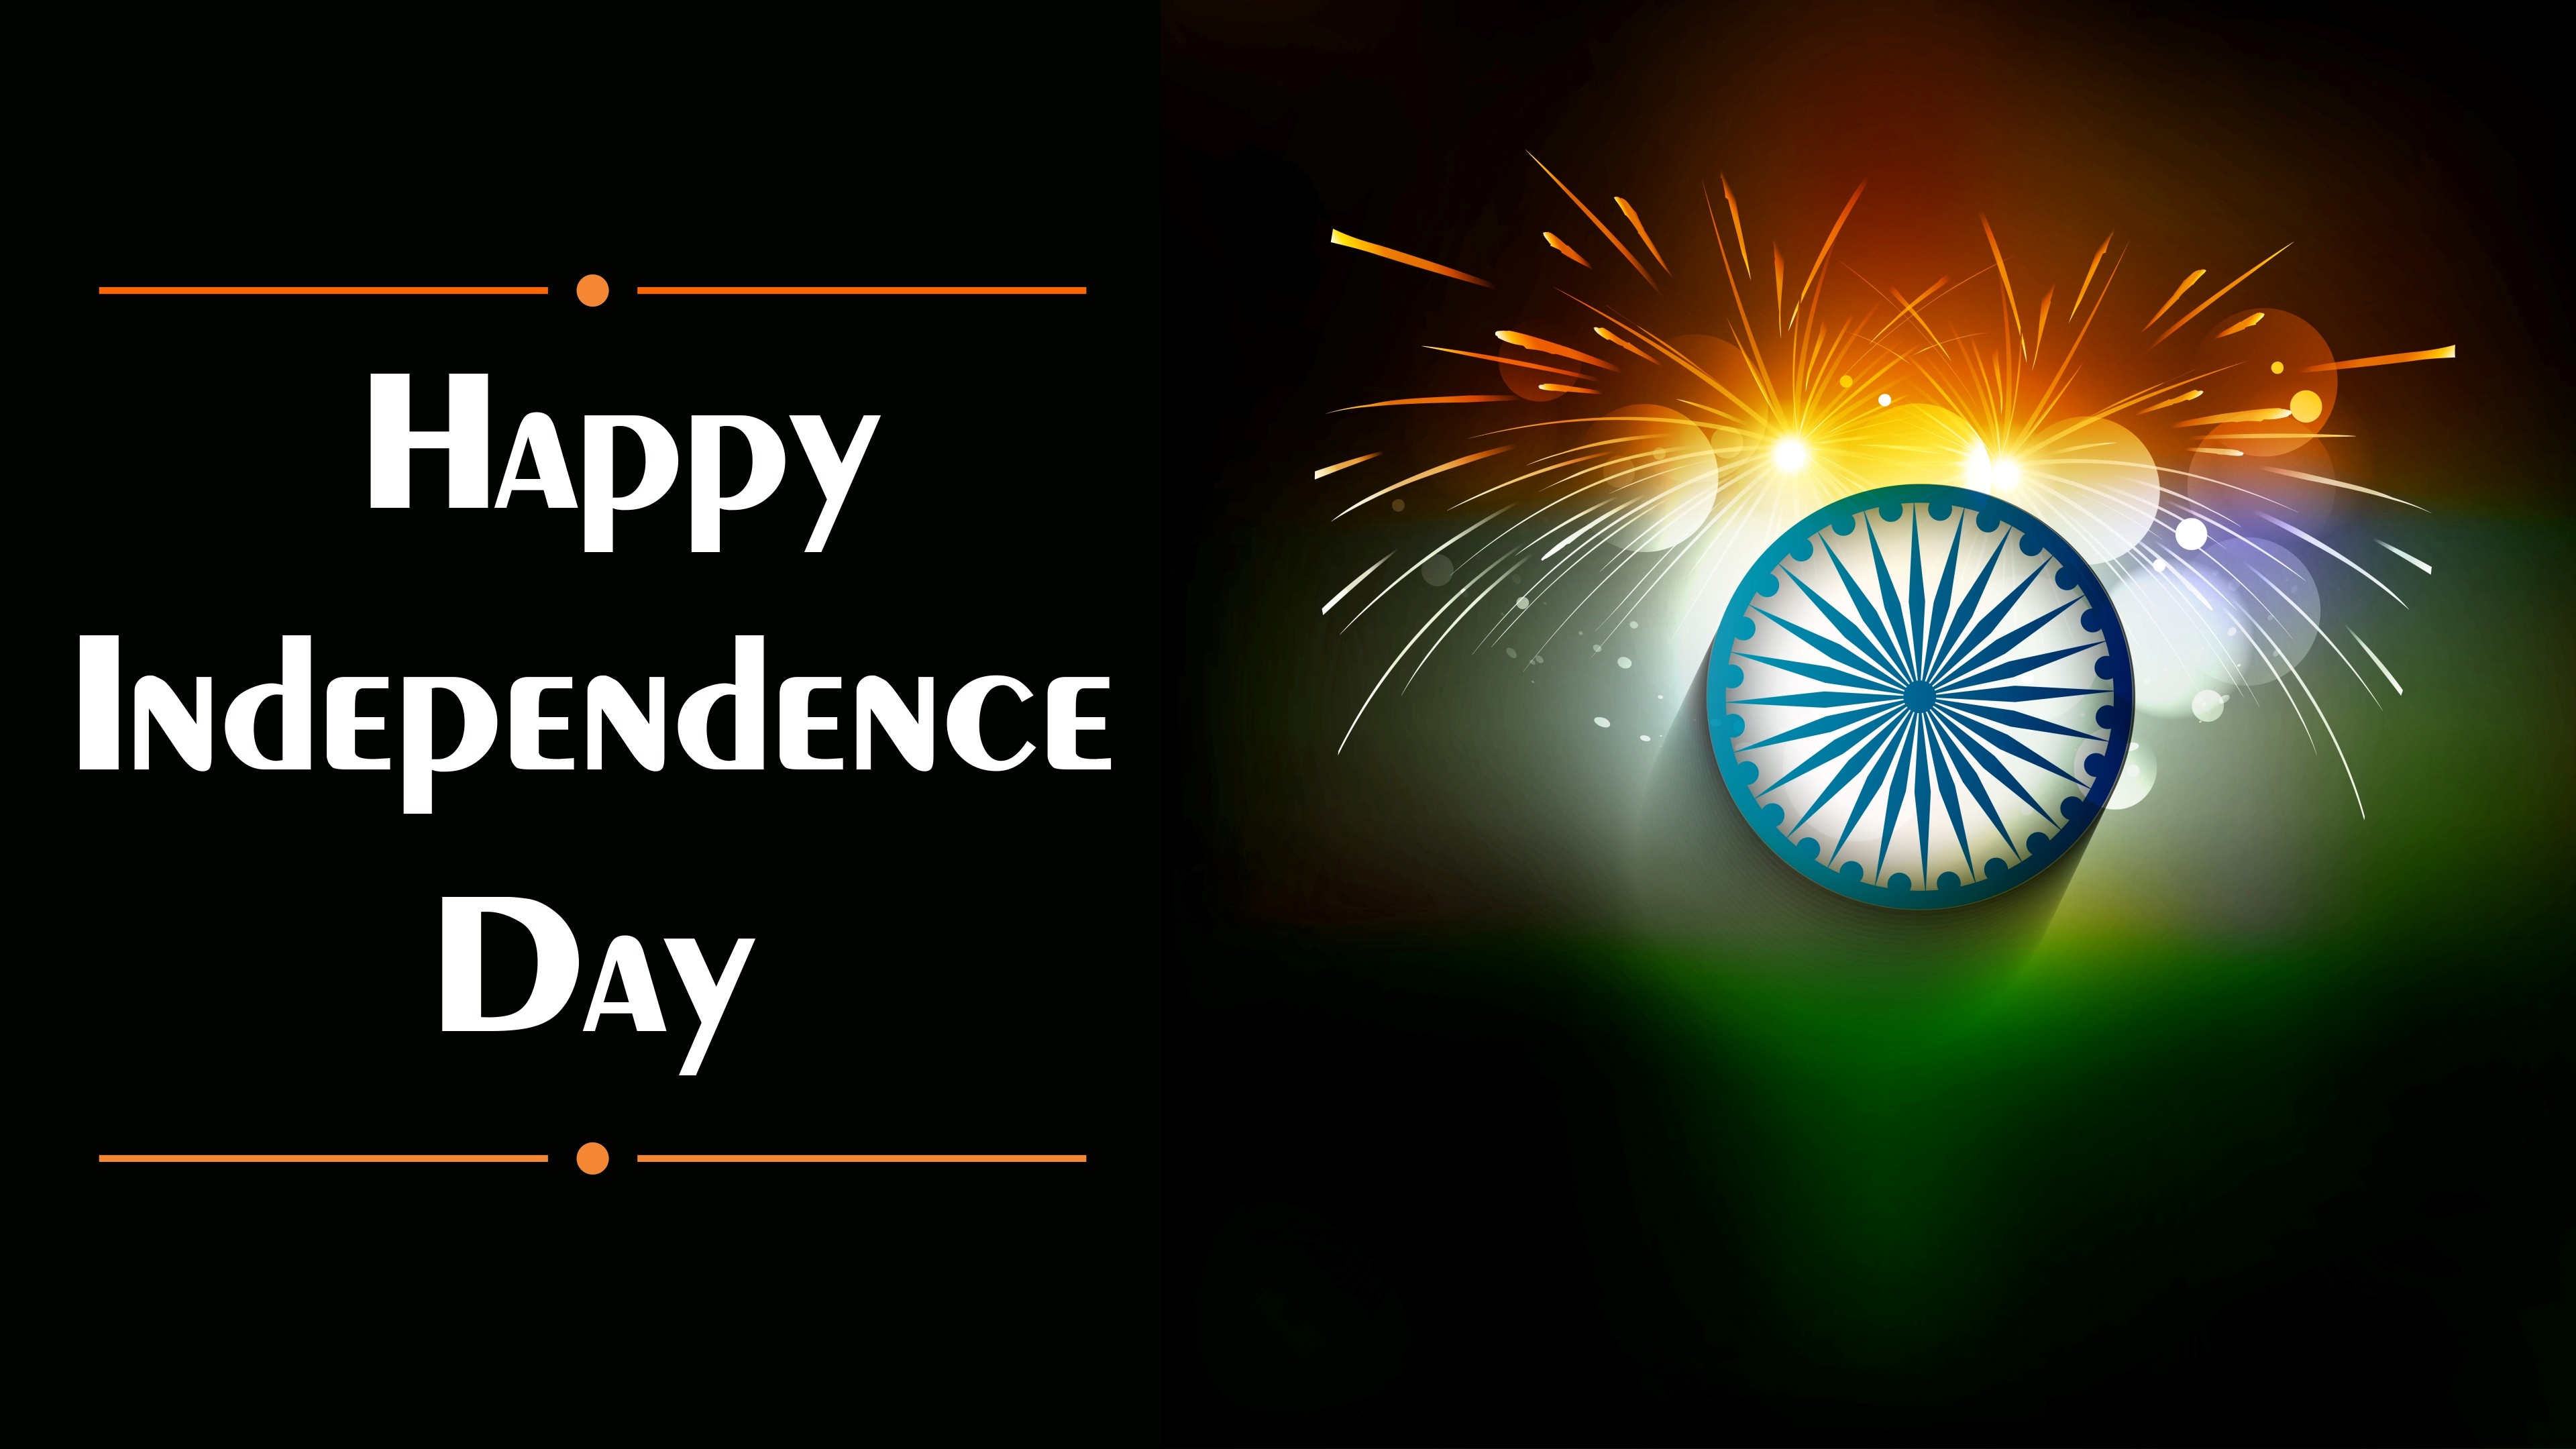 Independence Day Wishes 2020 Images, Messages, Quotes & Greetings